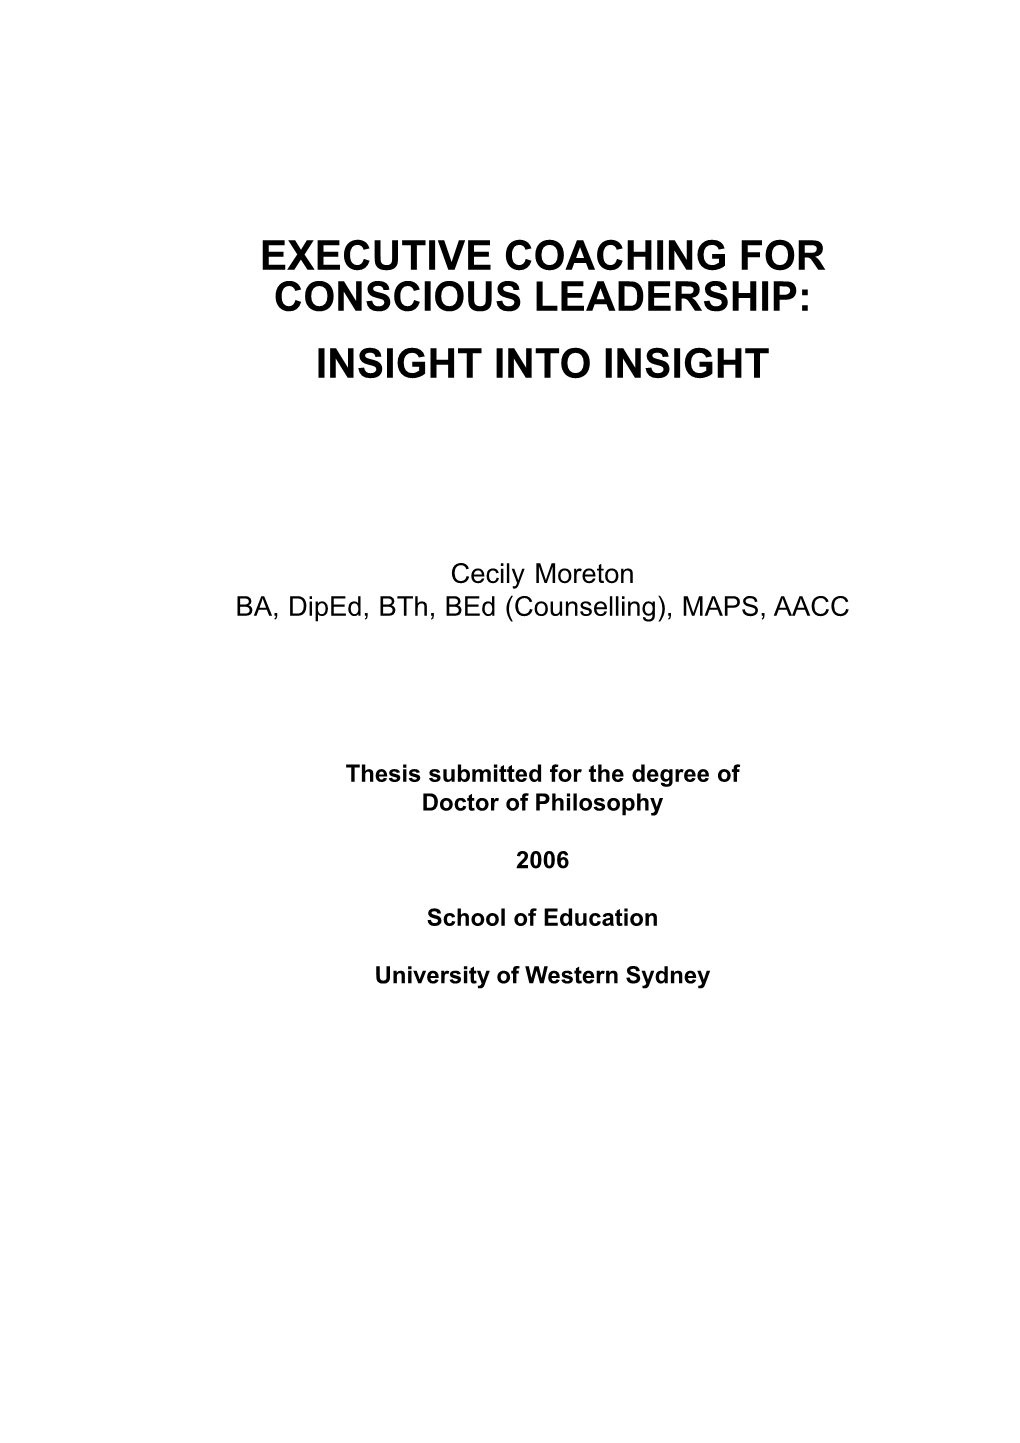 Executive Coaching for Conscious Leadership: Insight Into Insight